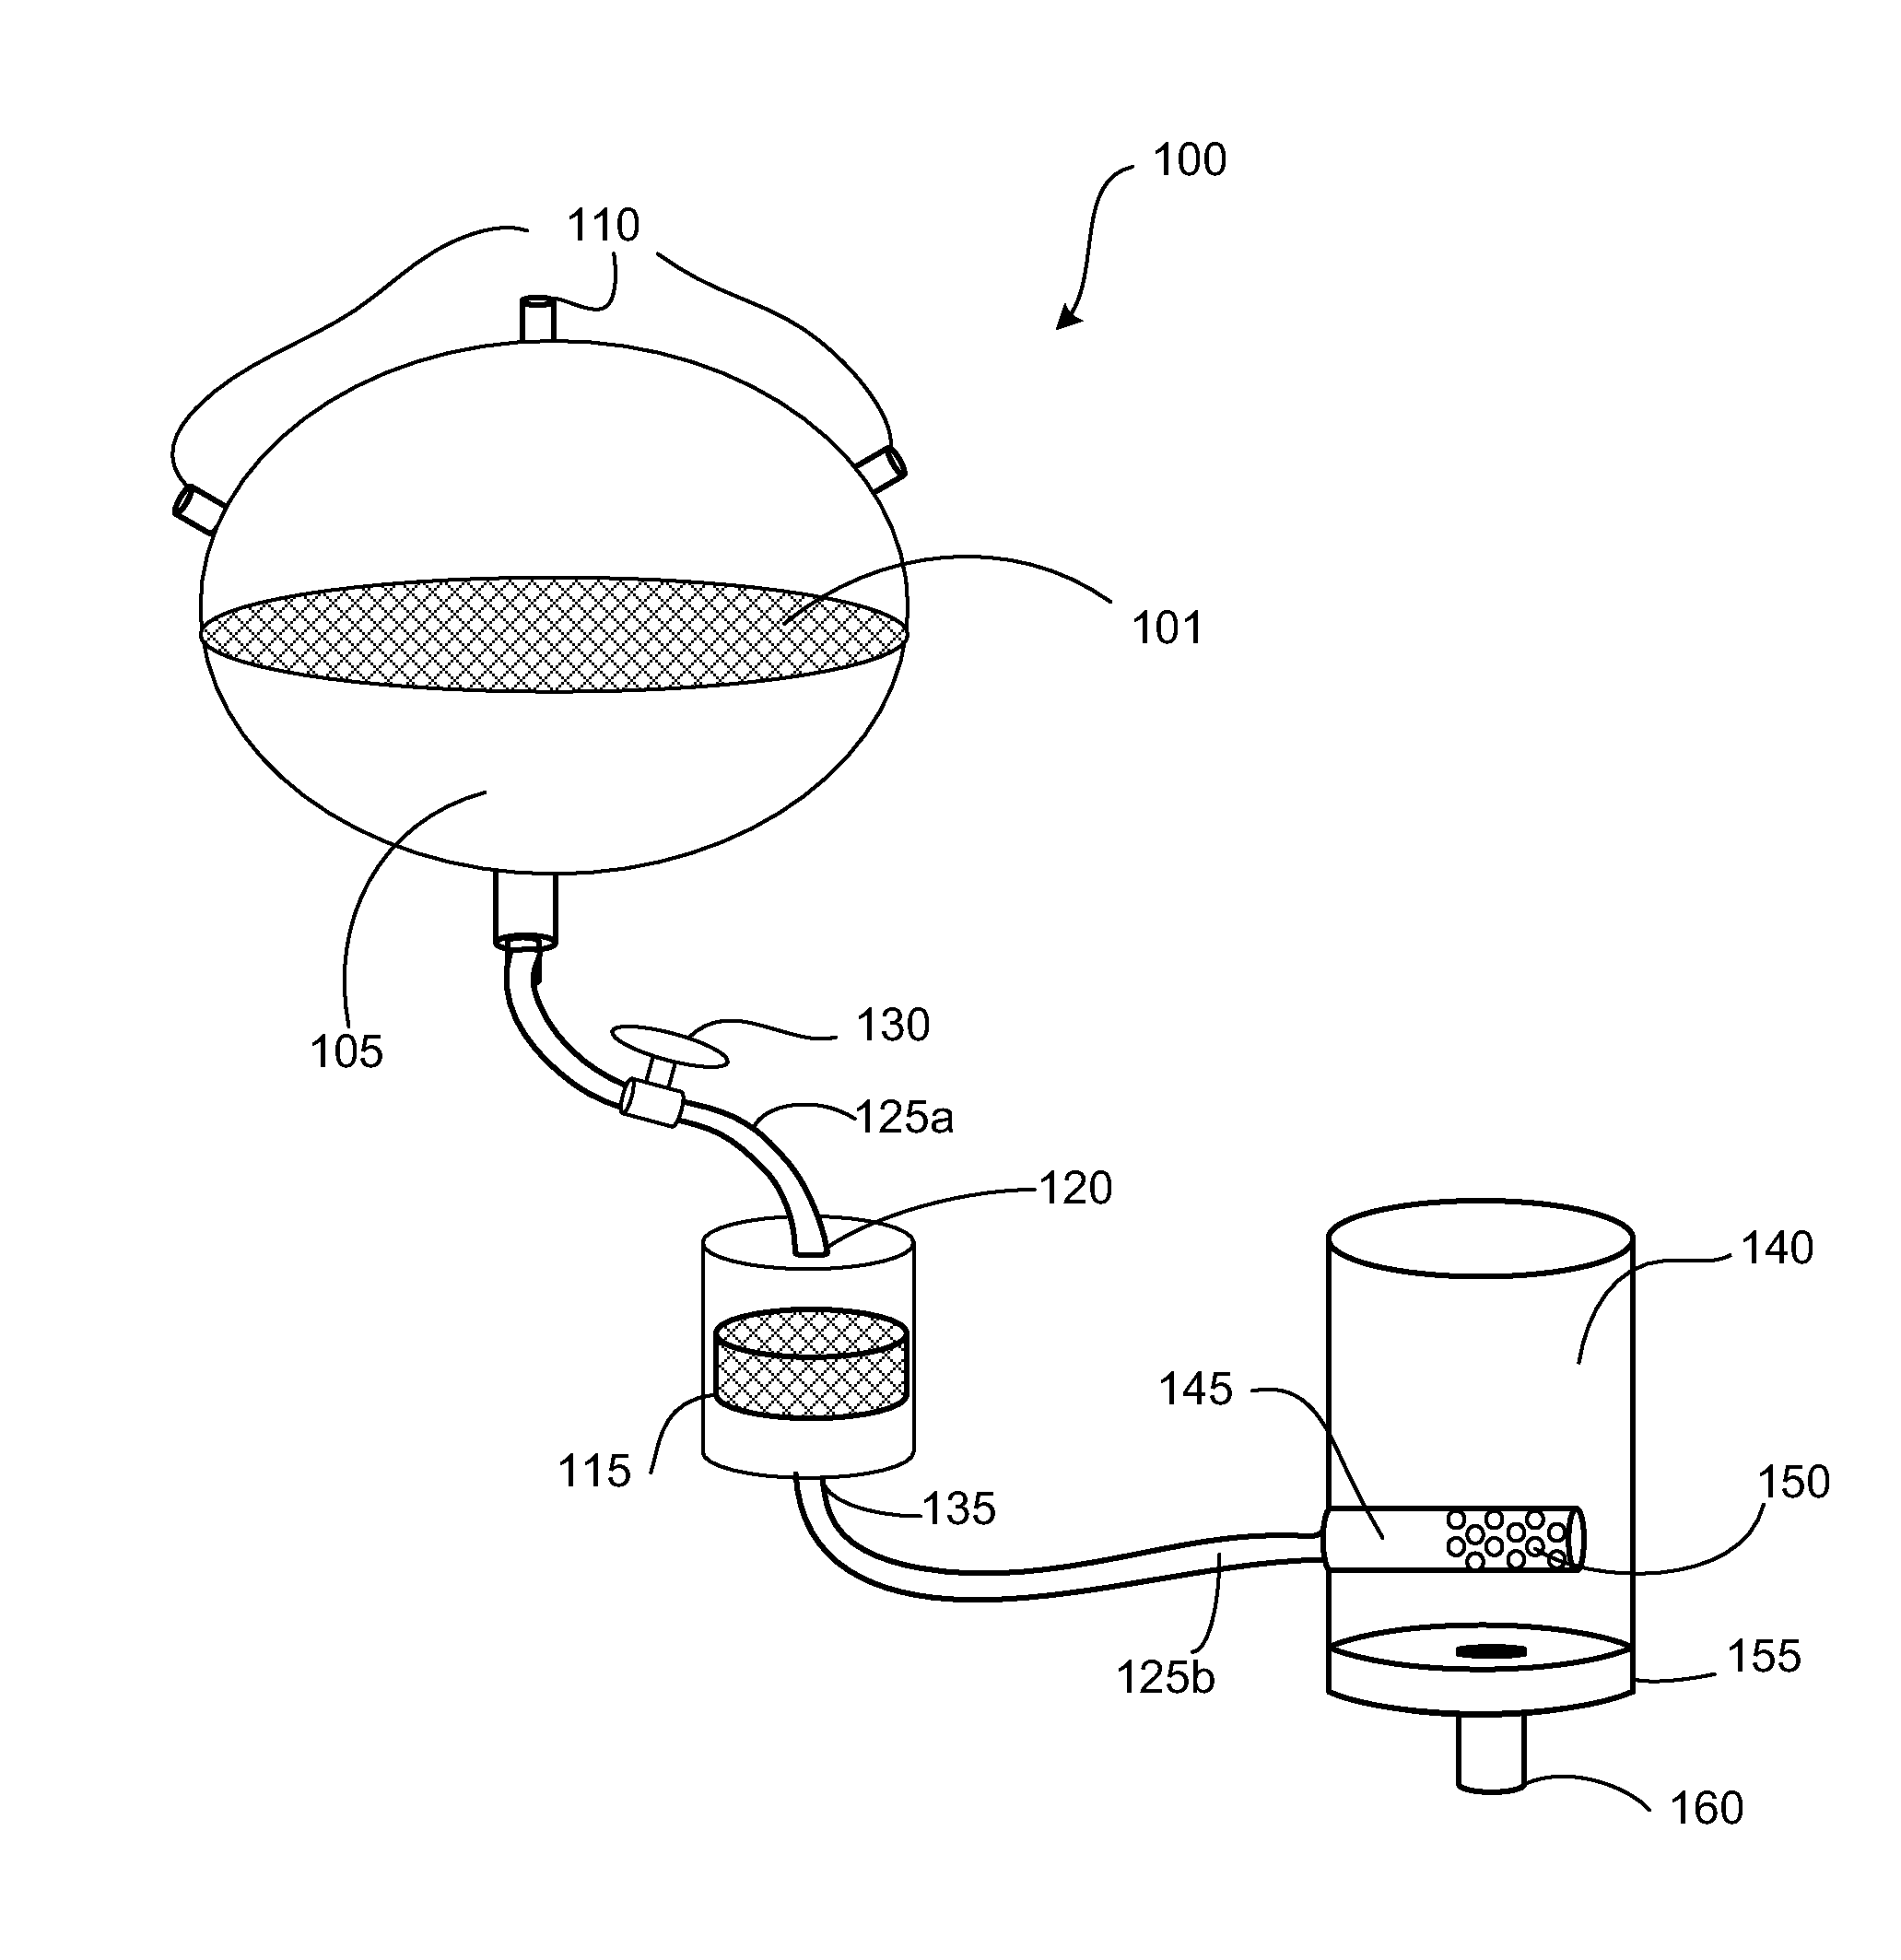 Apparatus and methods for cell isolation